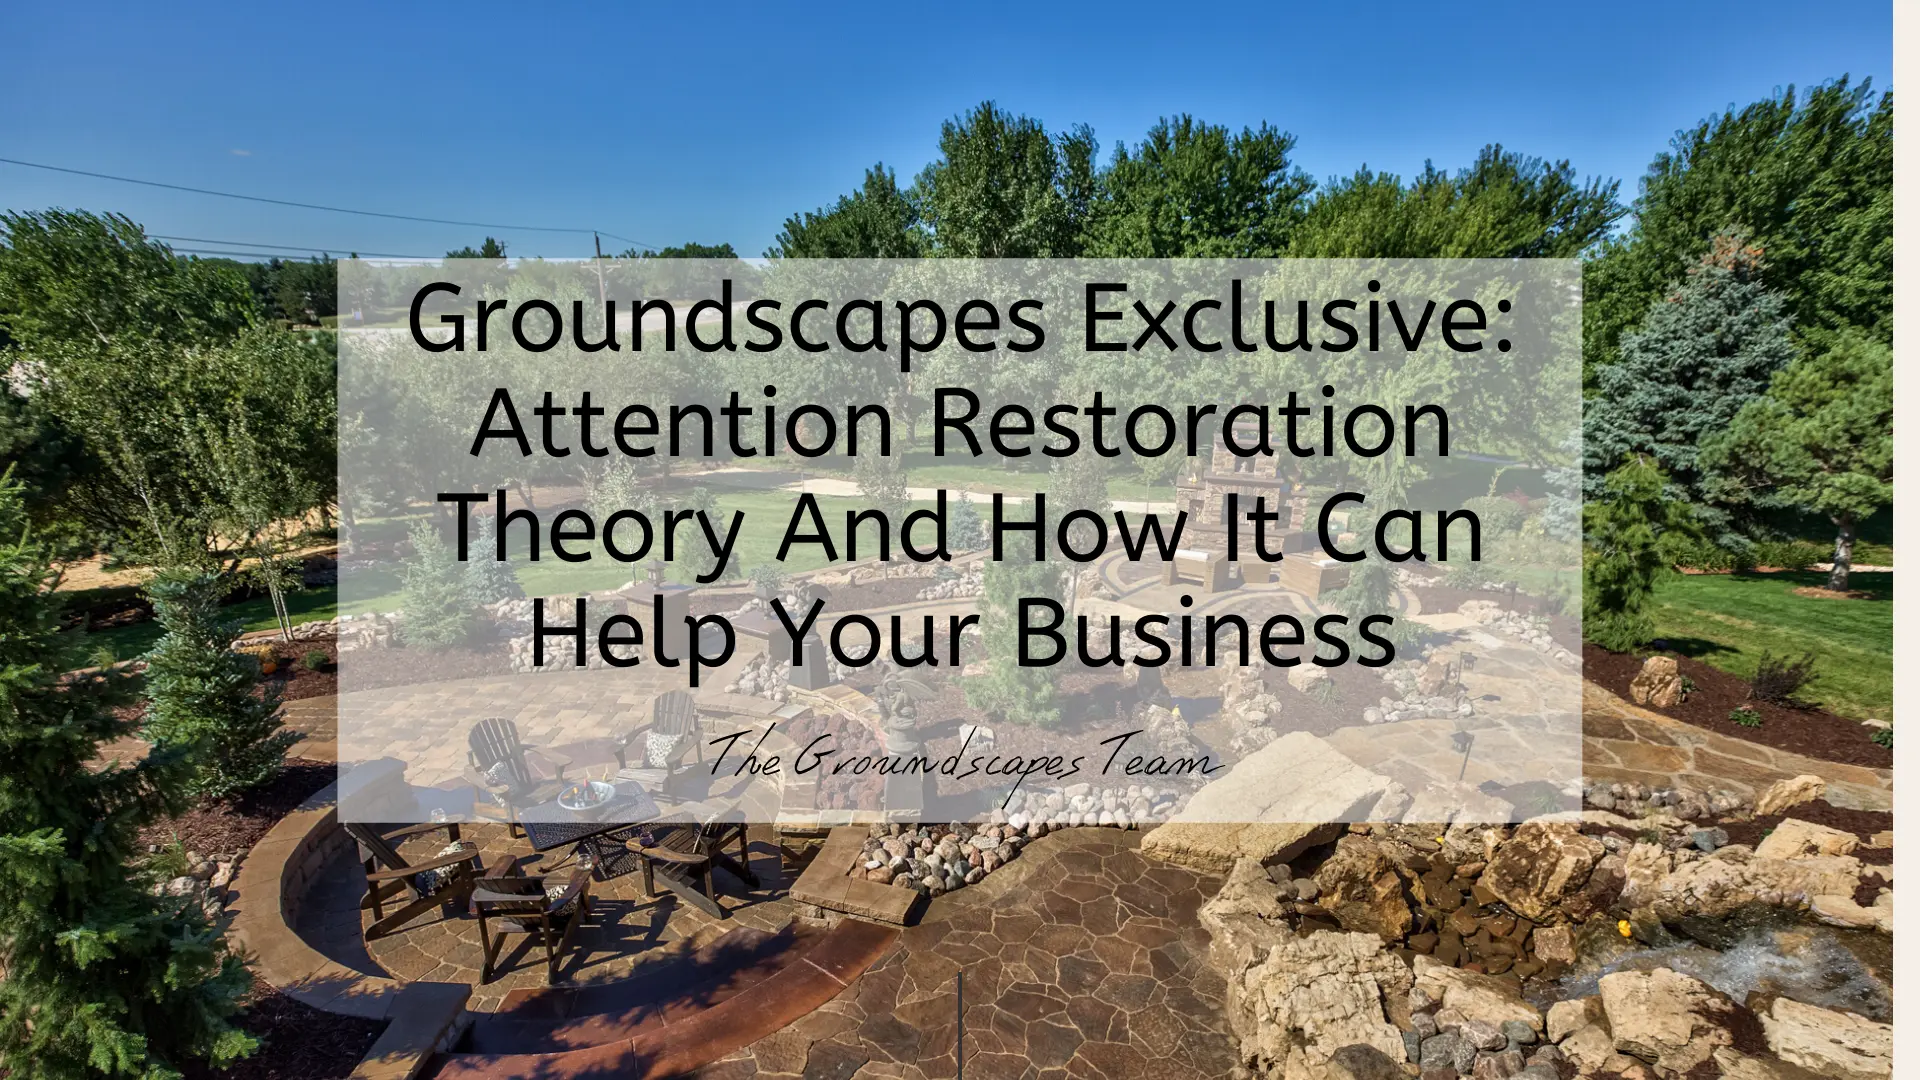 Groundscapes Exclusive: Attention Restoration Theory And How It Can Help Your Business